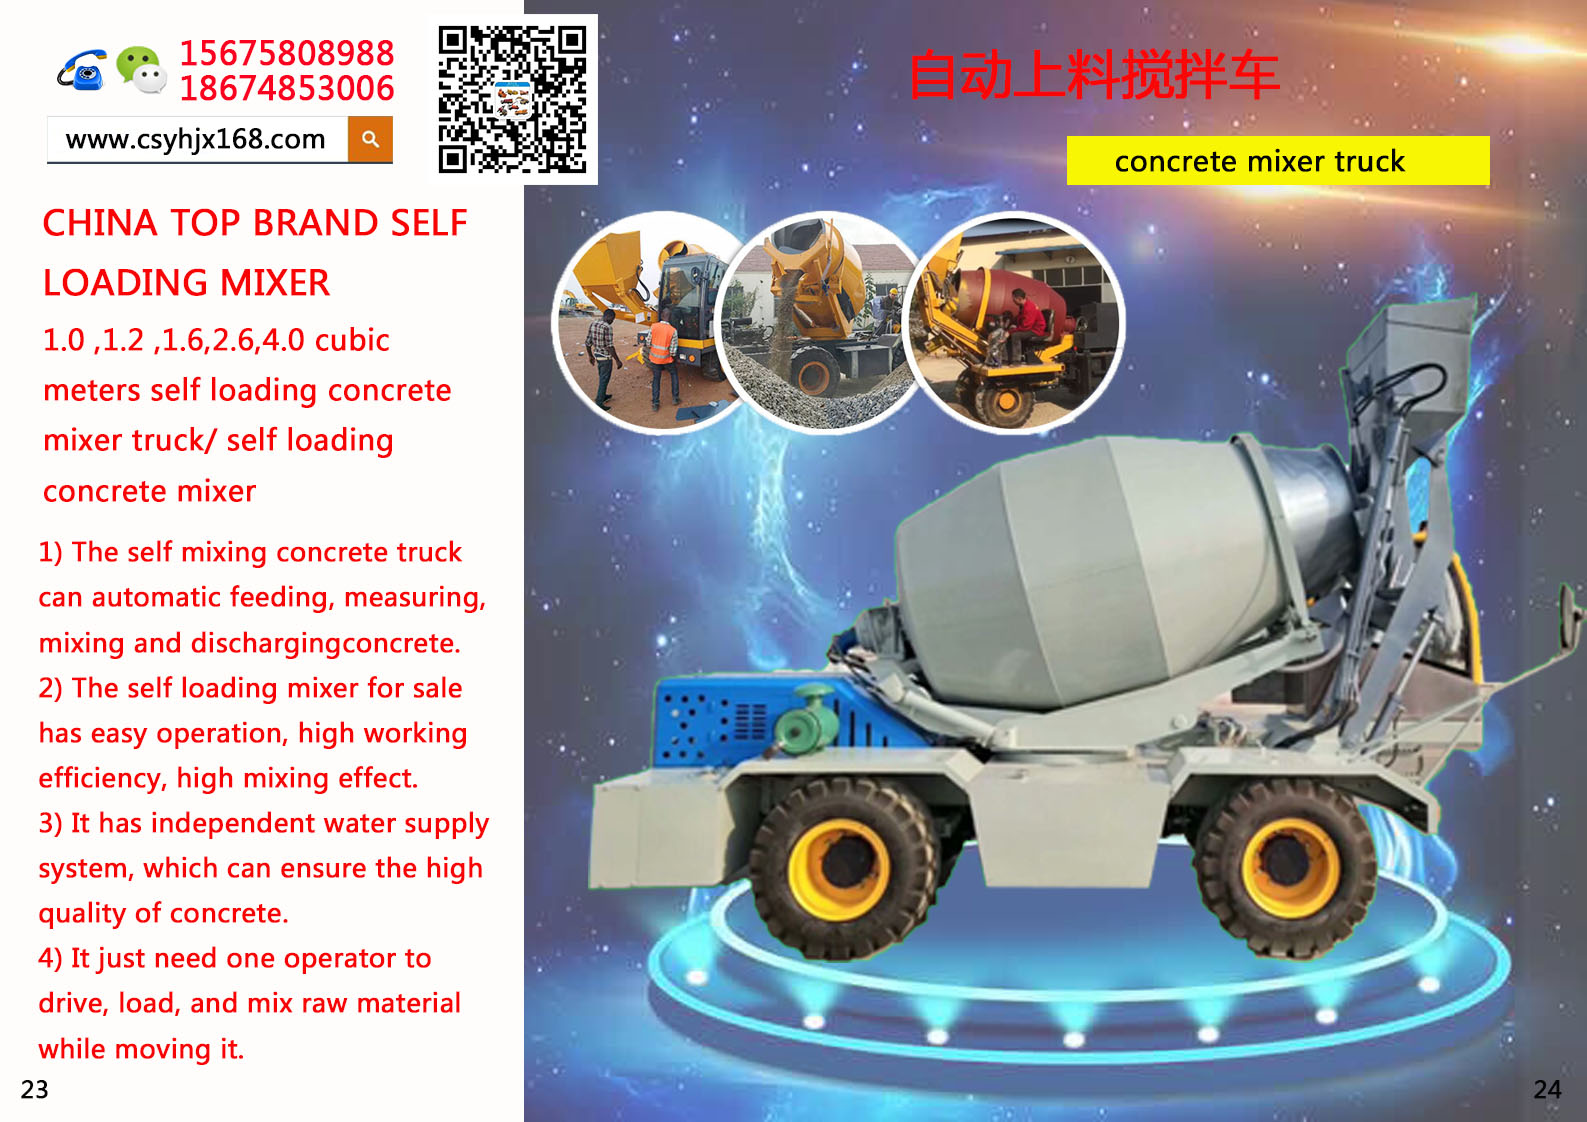 Mobile mixing station；Automatic loading mixer truck